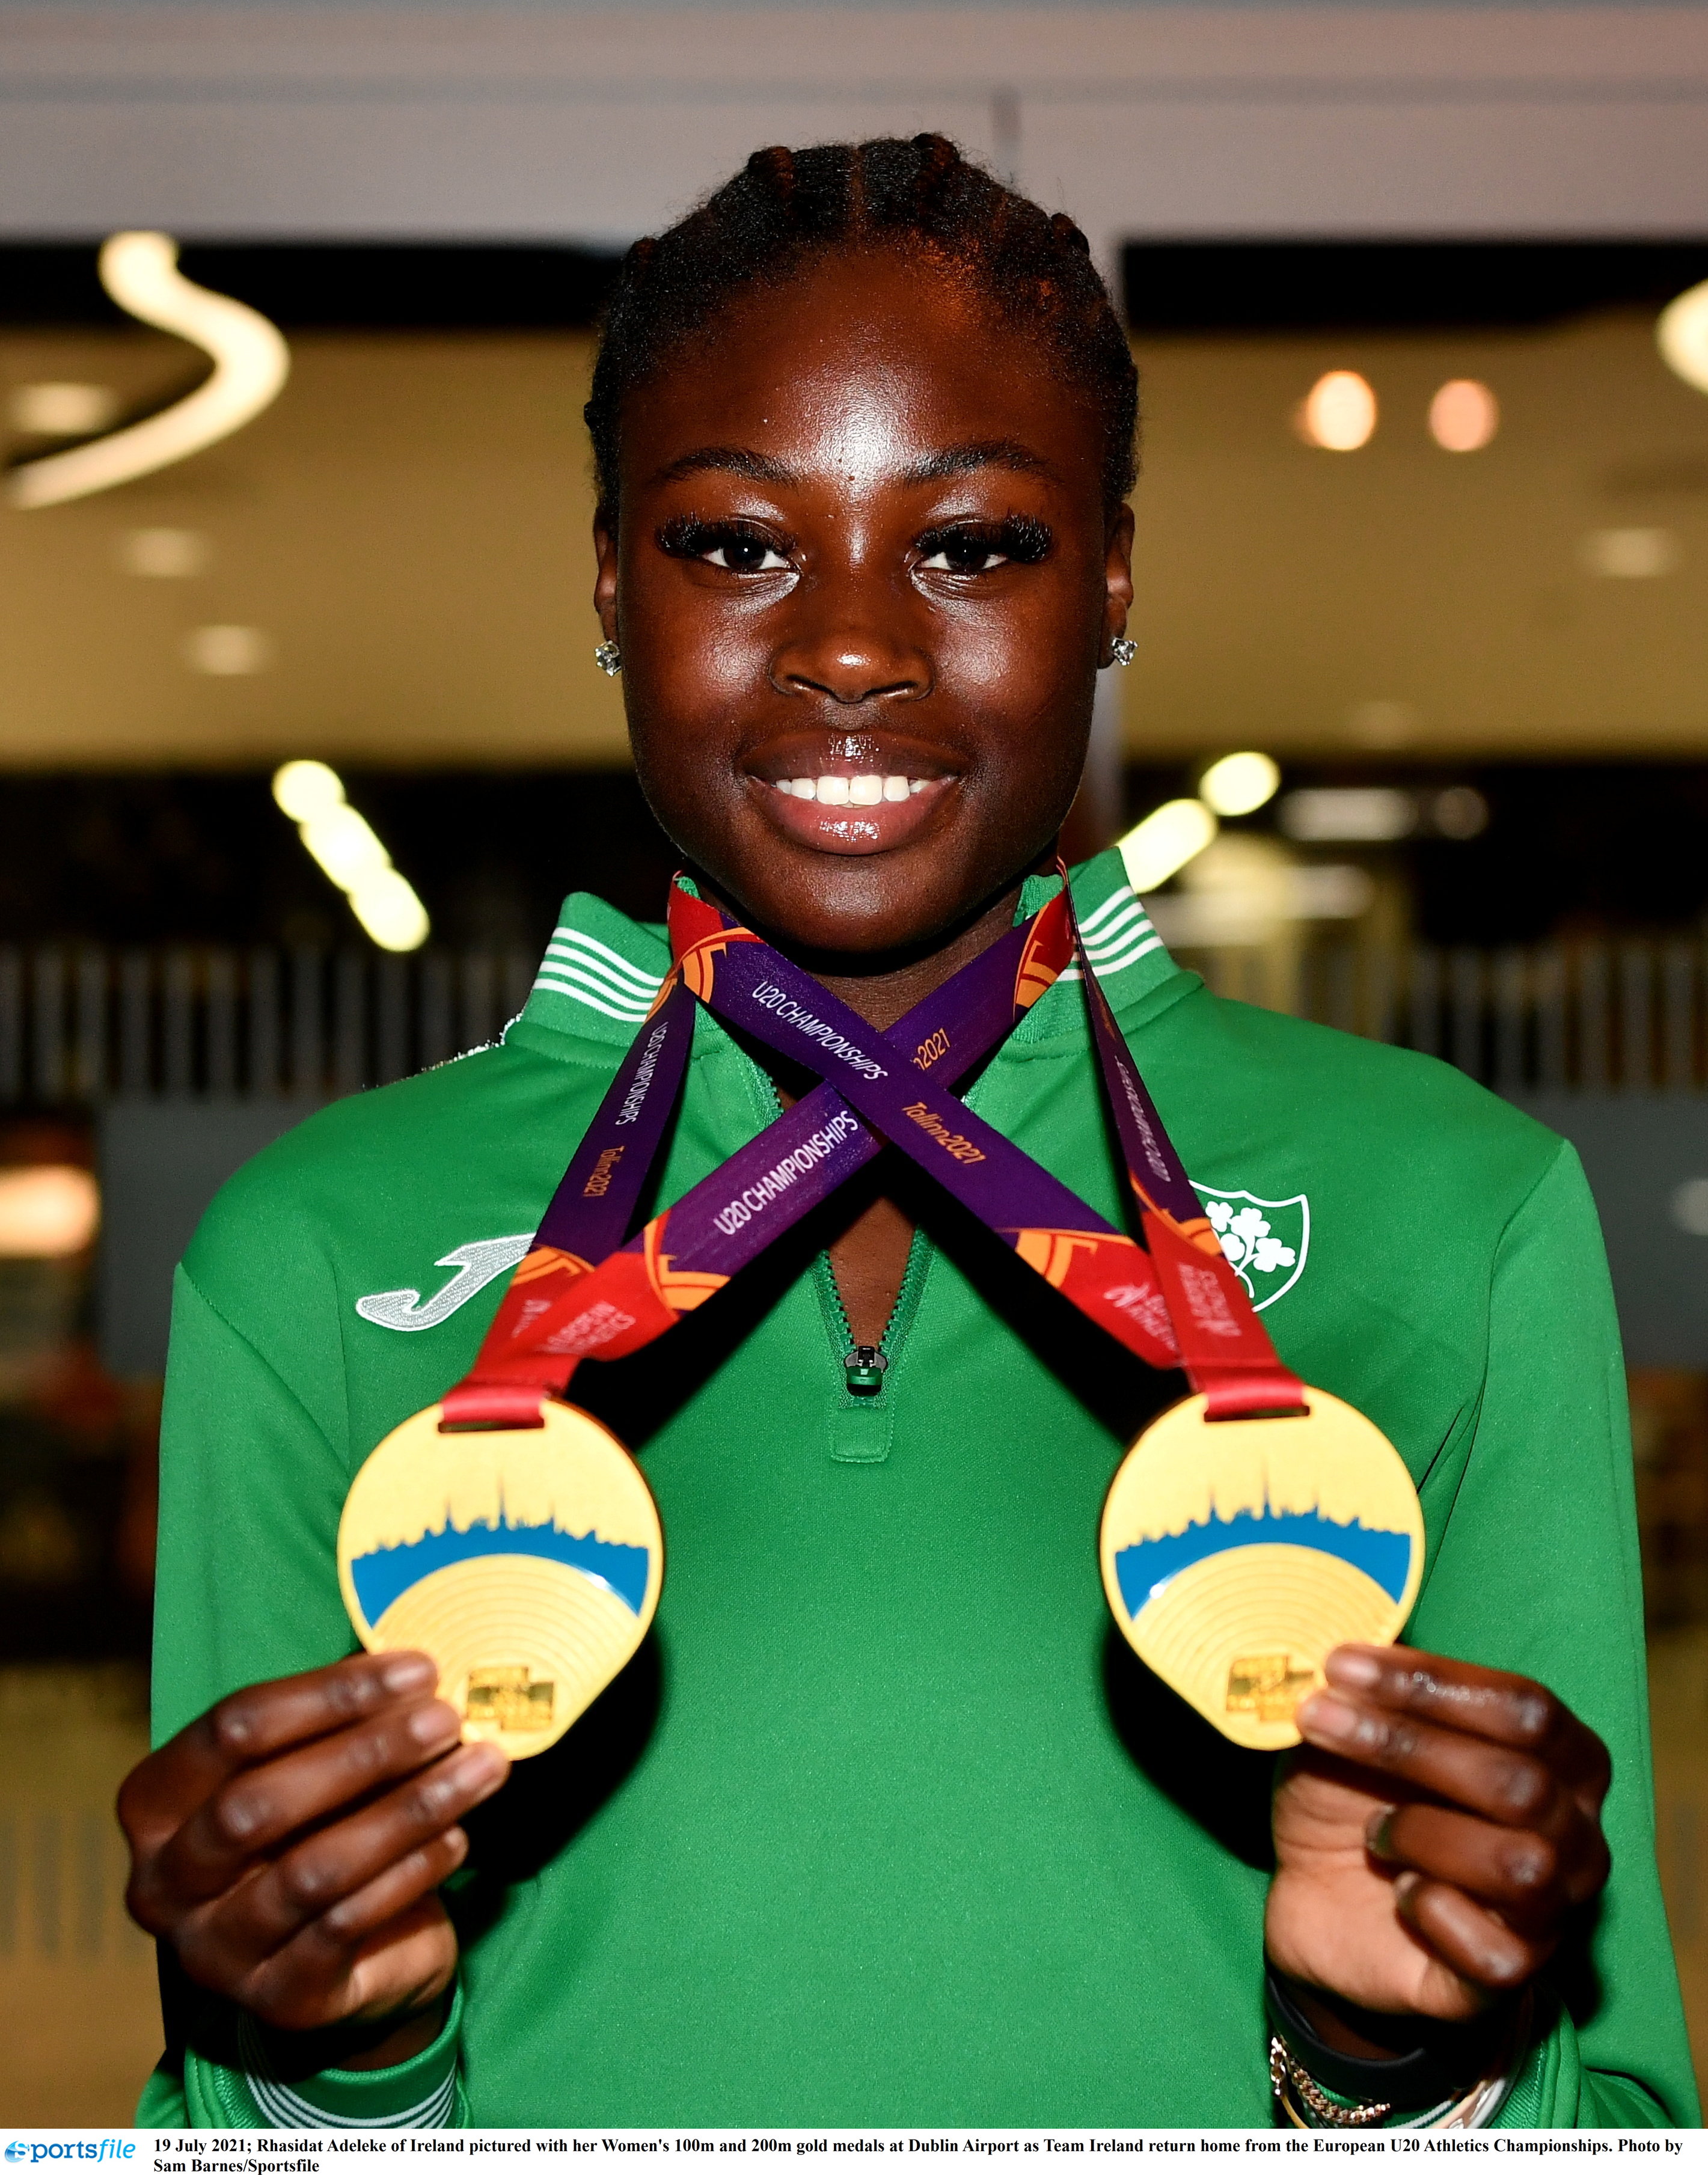 Rhasidat Adeleke Nominee for RTE Young Sportperson of the Year